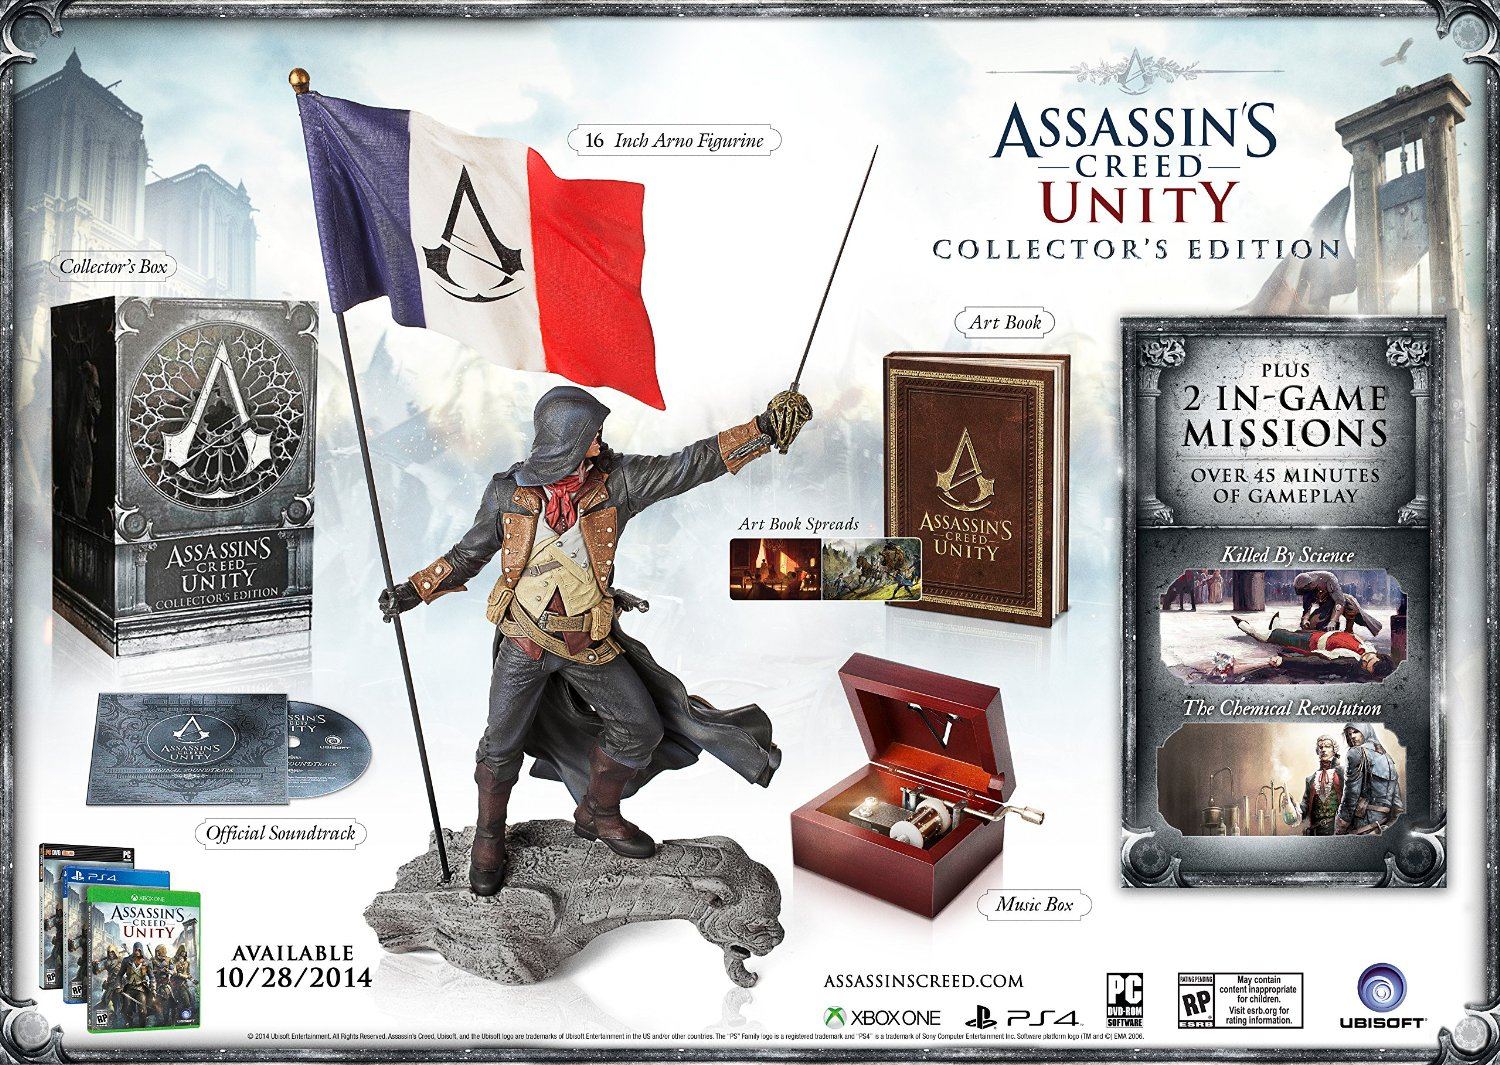  Assassin's Creed: Unity (PS4) - Pre-Owned : Video Games